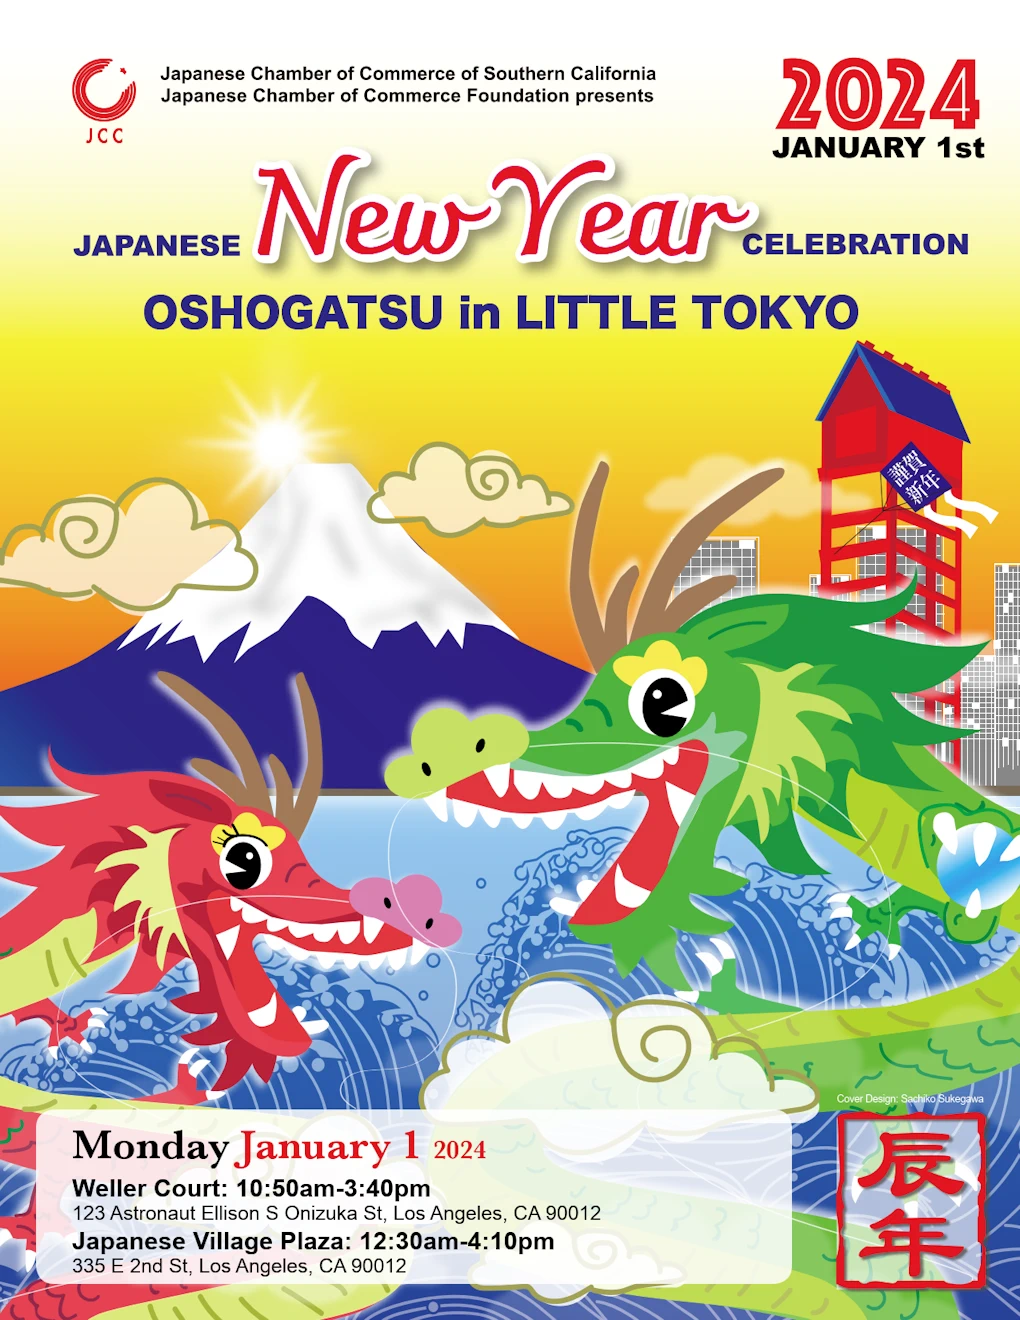 2024 - 25th Annual Japanese New Year's Oshogatsu Festival Event - Little Tokyo, Japantown (2 Locations: Jan 1, 2024) Entertainment Schedule!